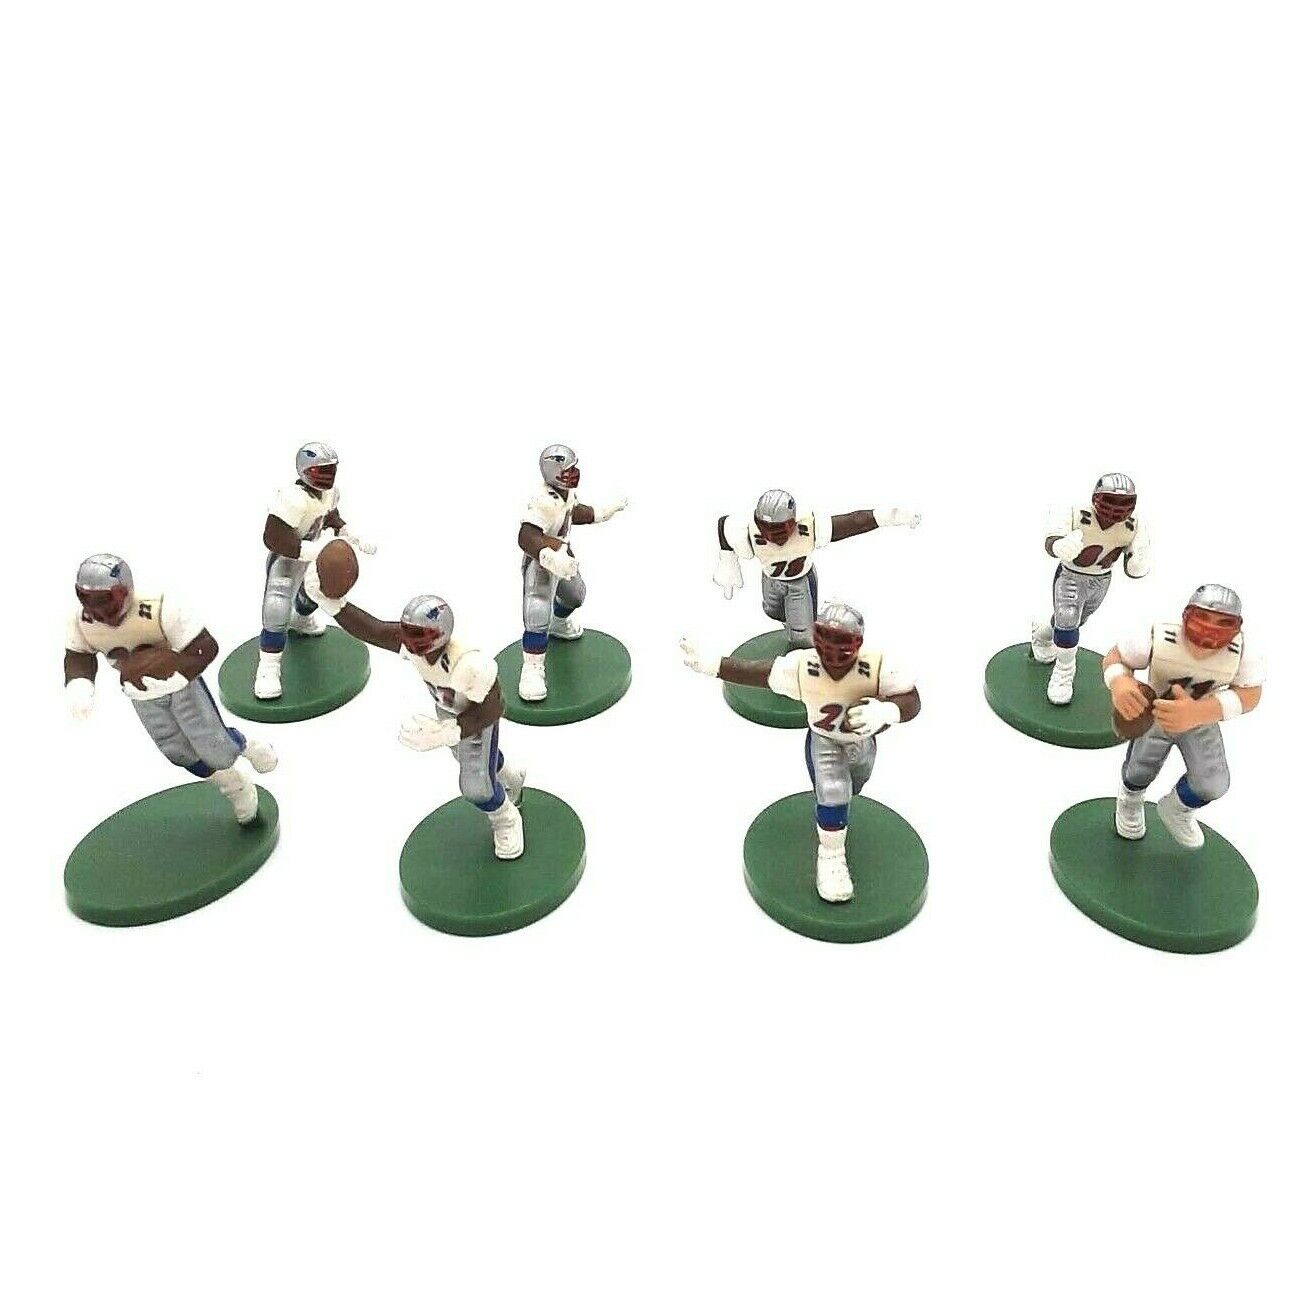 New England Patriots Vintage 1997 Articulated Mini Football Action Figures Set